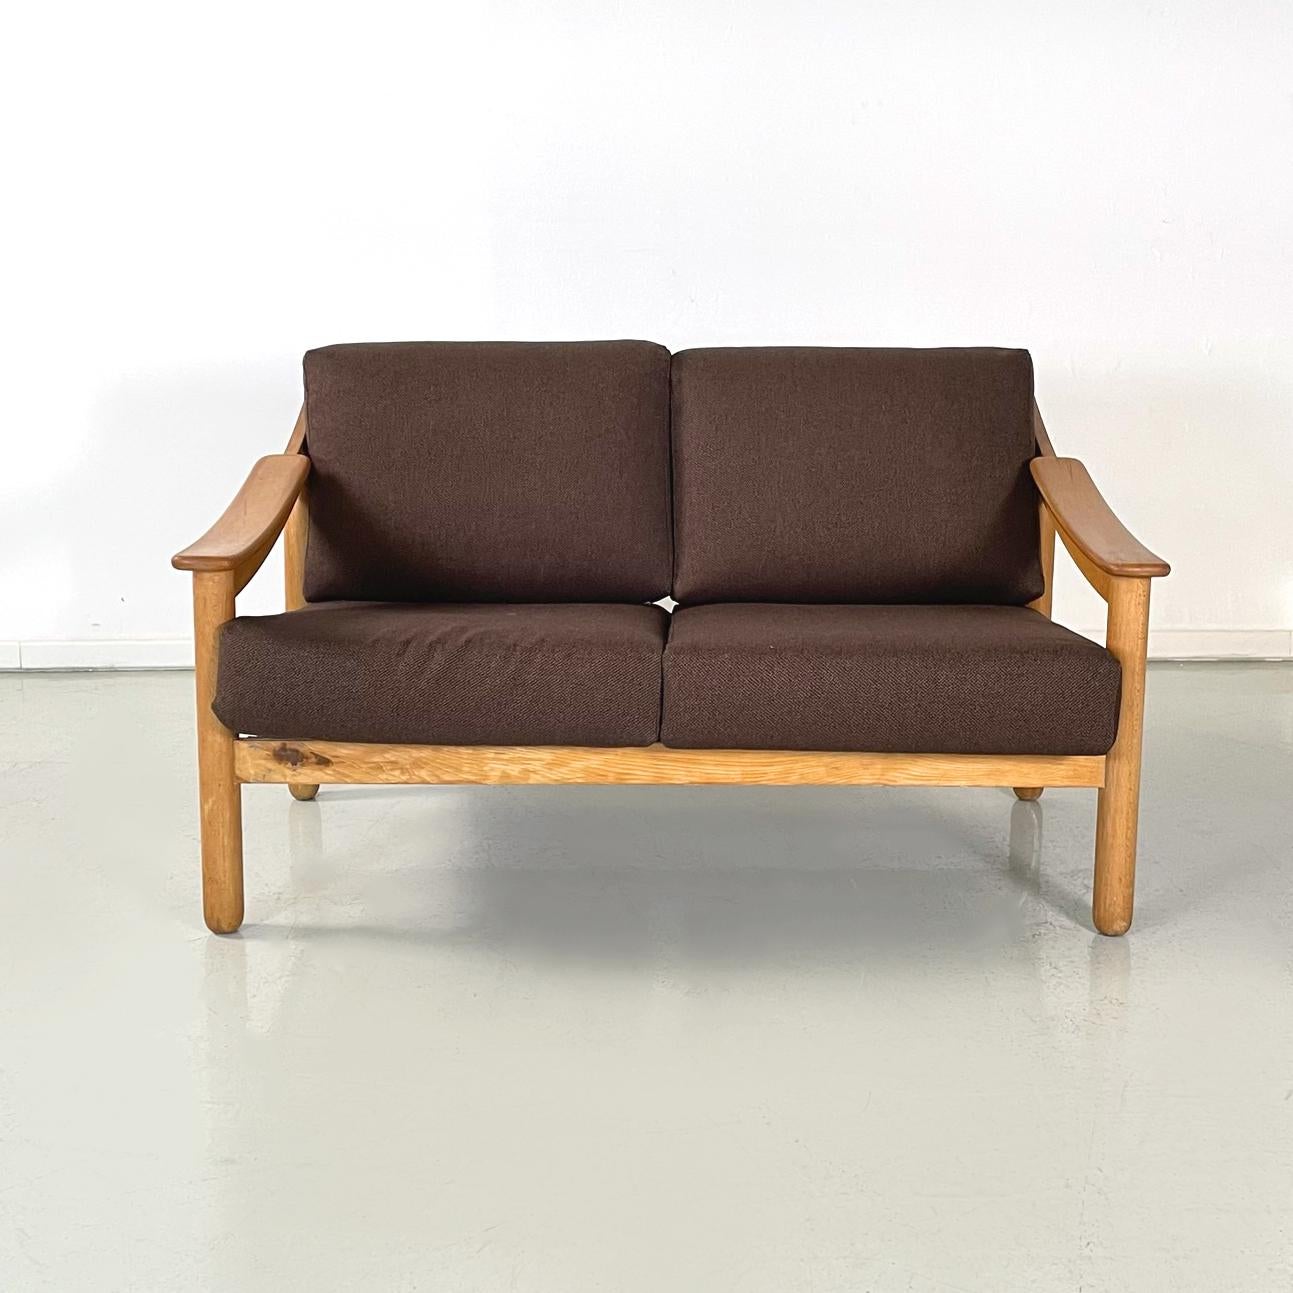 Mid-Century Modern Italian Midcentury Brown Armchairs Sofa Loden by Magistretti for Cassina 1960s